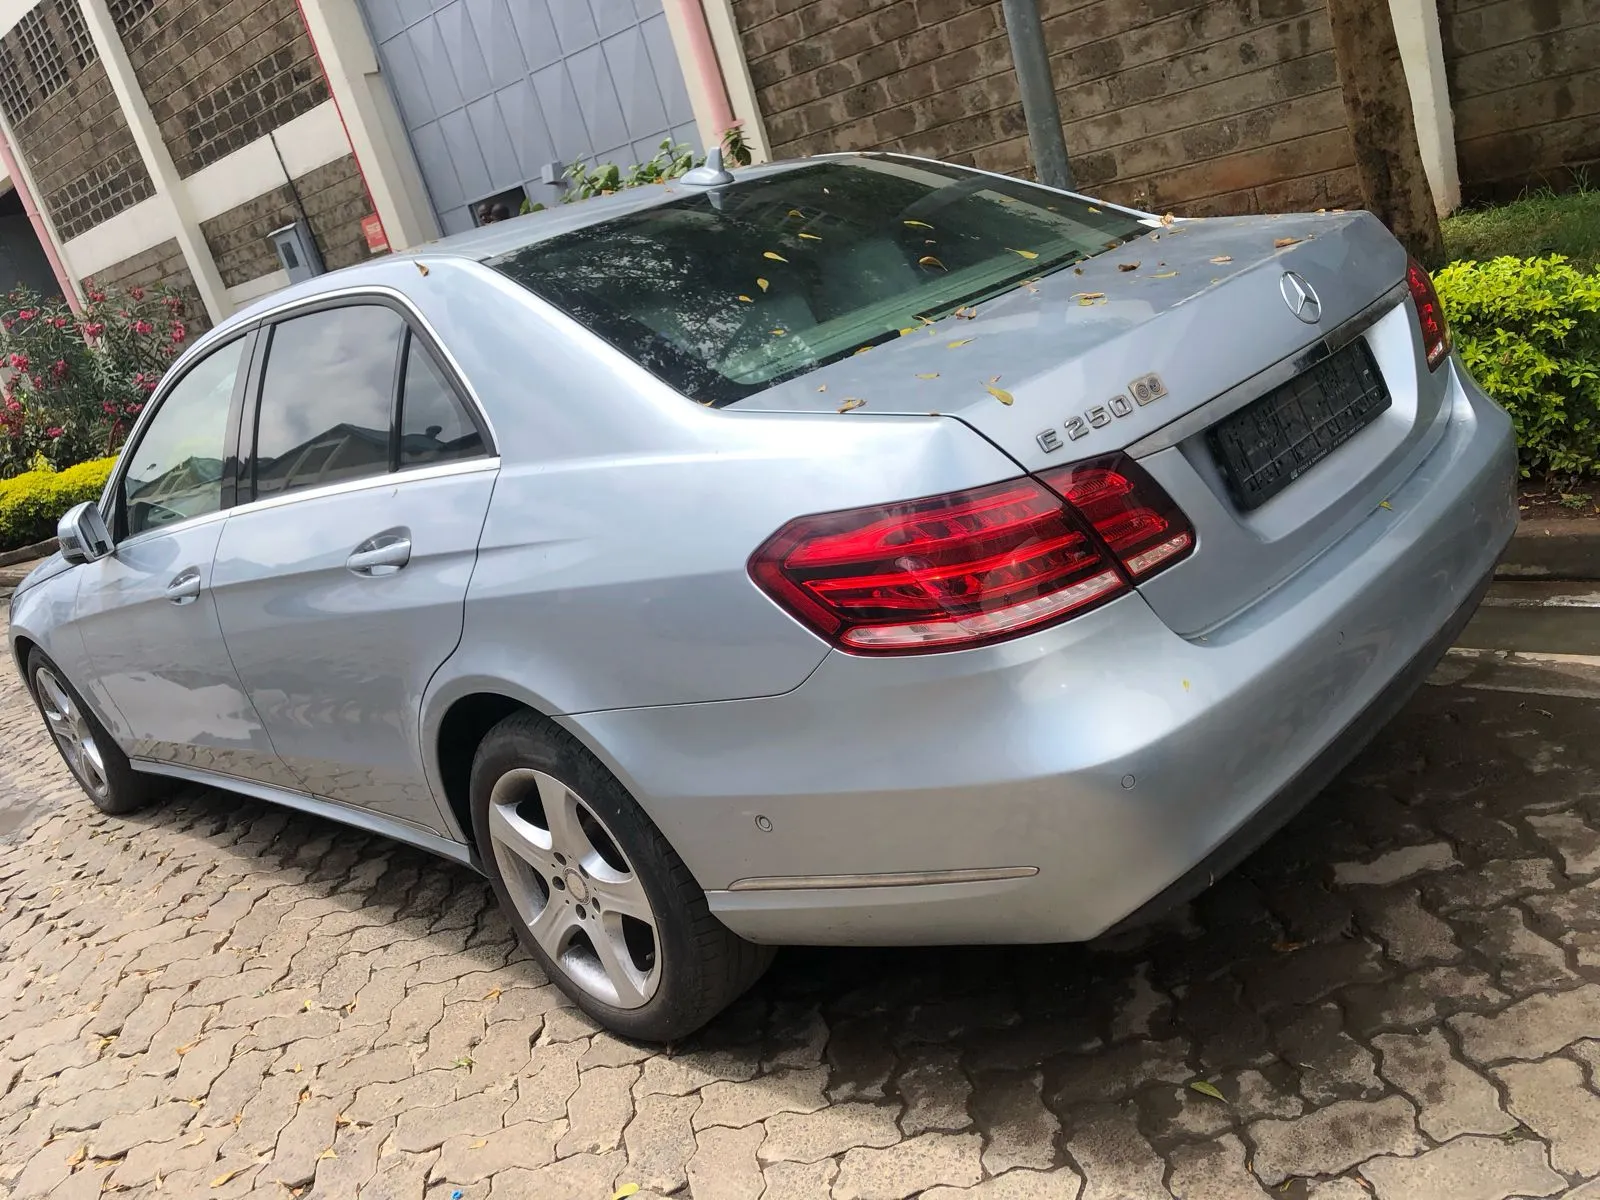 QUICK SALE Mercedes Benz E250 for sale in Kenya Cheapest You Pay 30% DEPOSIT Trade in OK EXCLUSIVE hire purchase installments 🔥 ON SALE